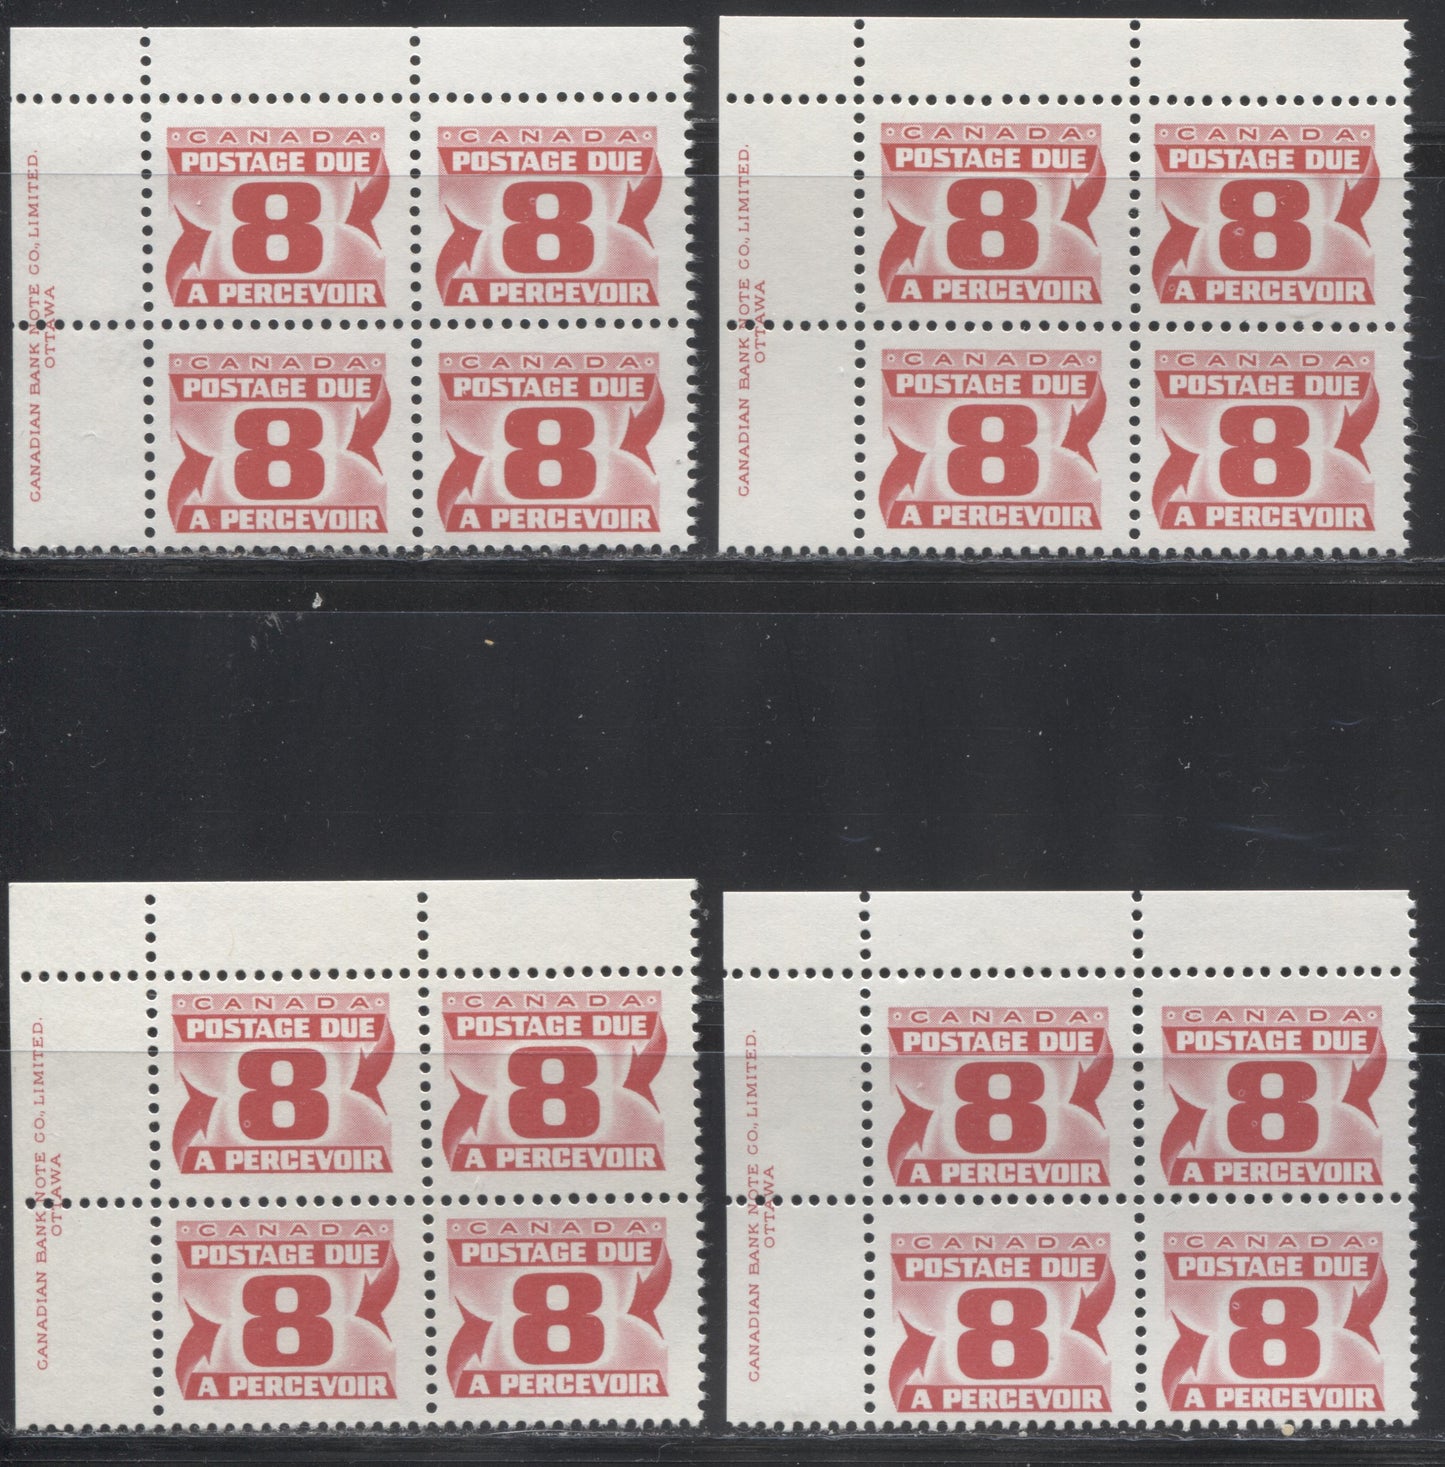 Lot 152 Canada #J34a 8c Carmine Rose 1977-1982, 4th Centennial Postage Due Issue, Four F/VFNH UL Inscription Blocks Of 4 On LF-fl & DF Bluish Gray, Grayish White & Bluish White Papers With PVA Gums, Perf 12.5 x 12, Possibly Constant Donut Flaws